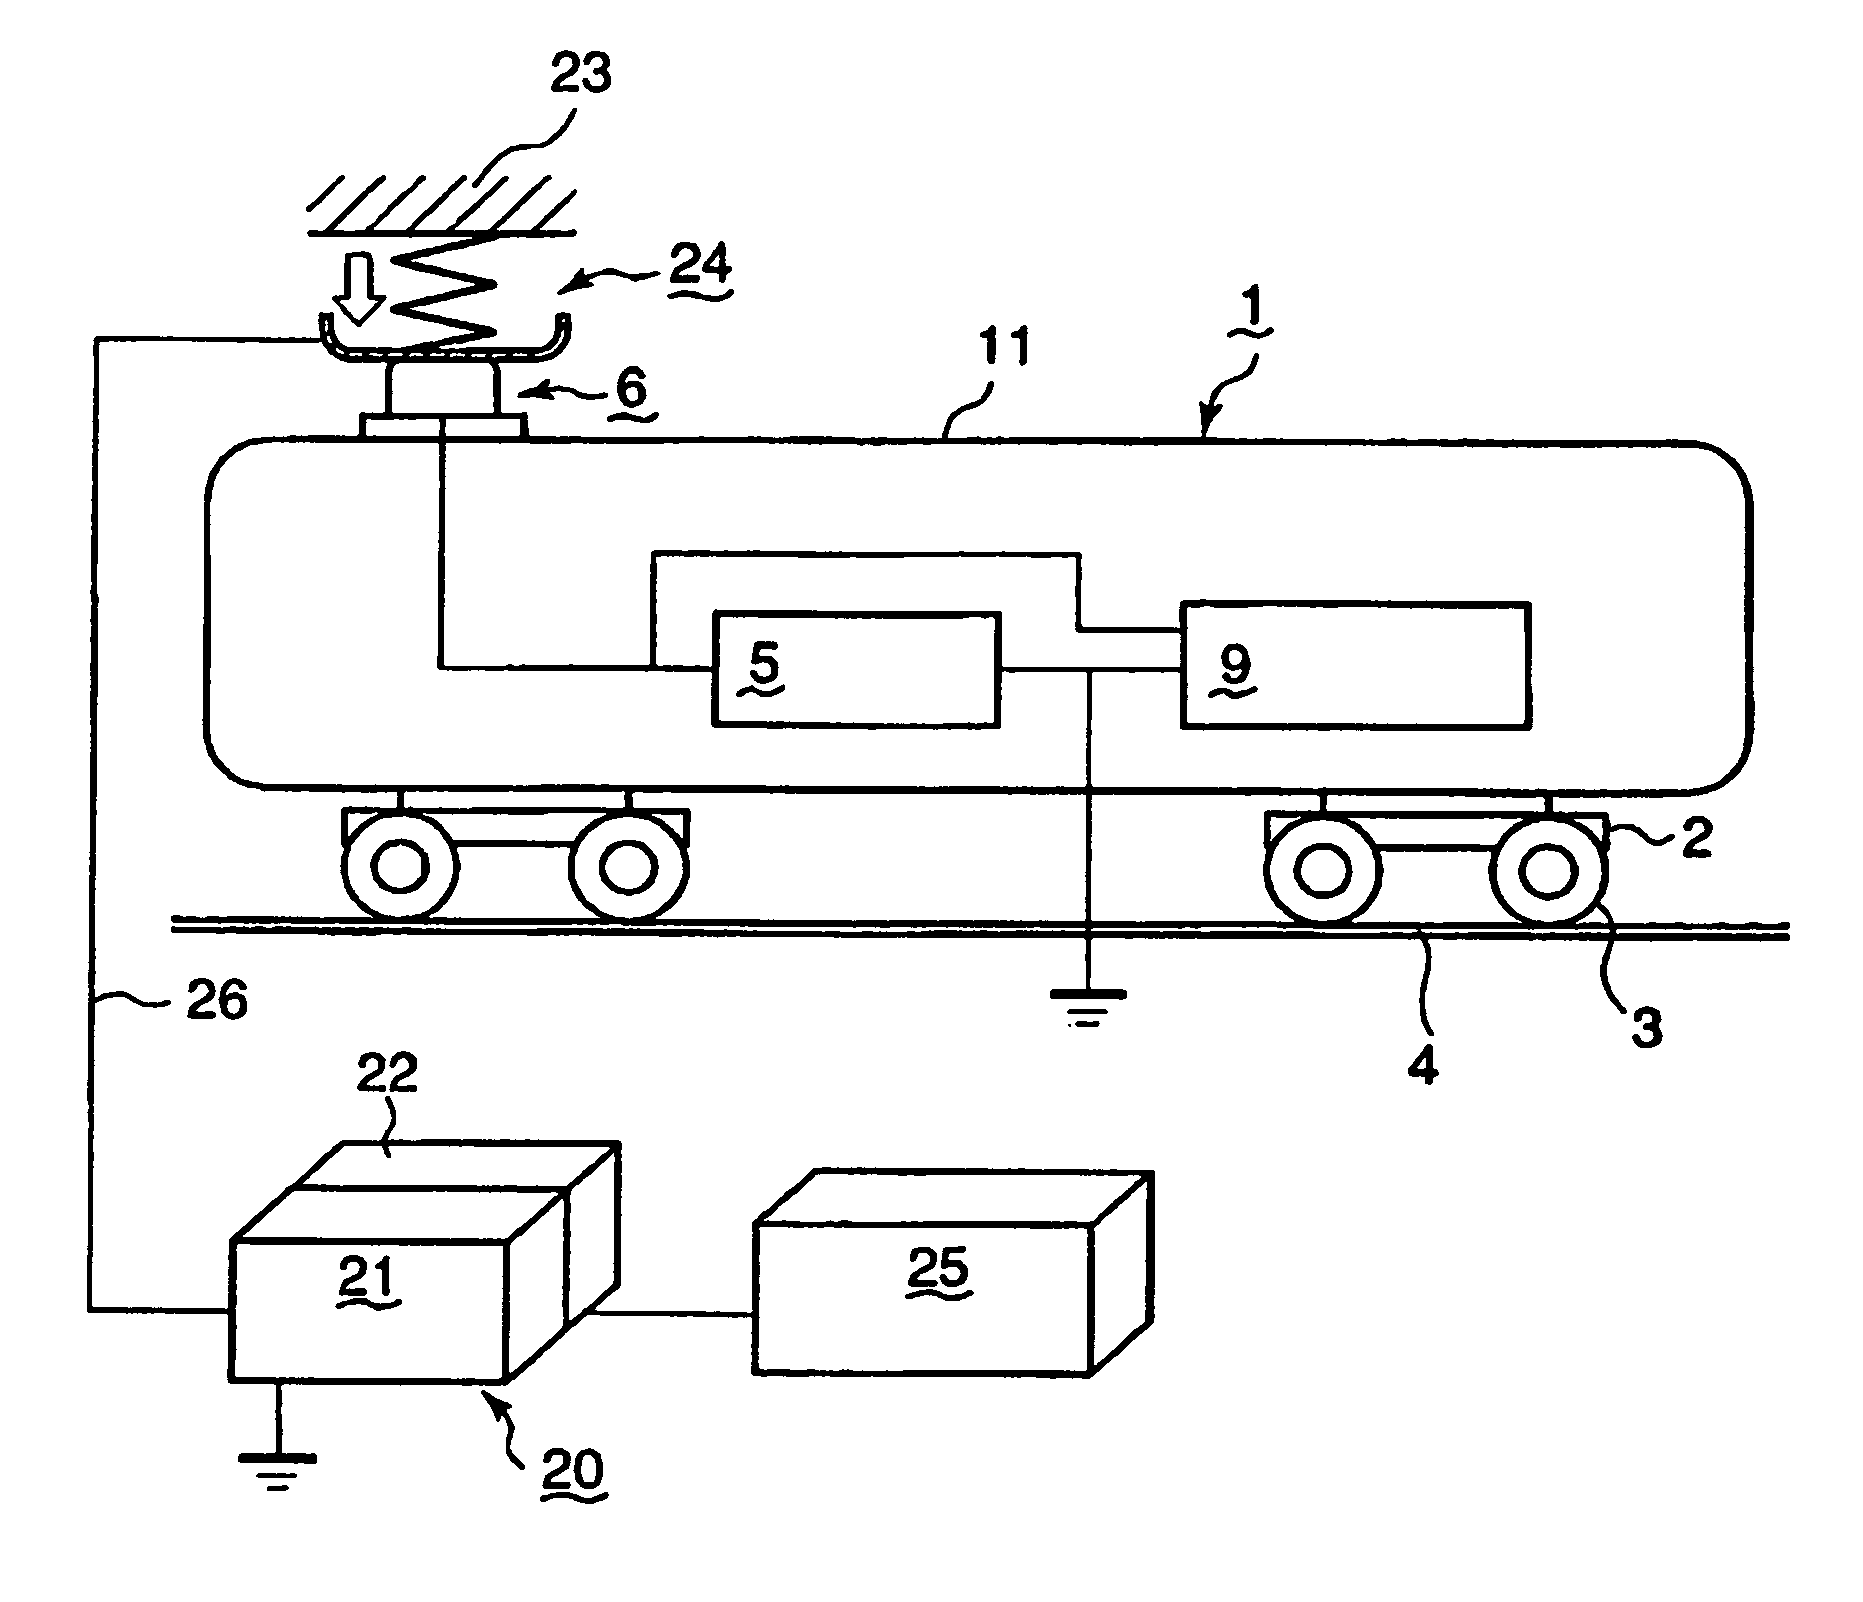 Feeder-lineless traffic system and charging method therefor